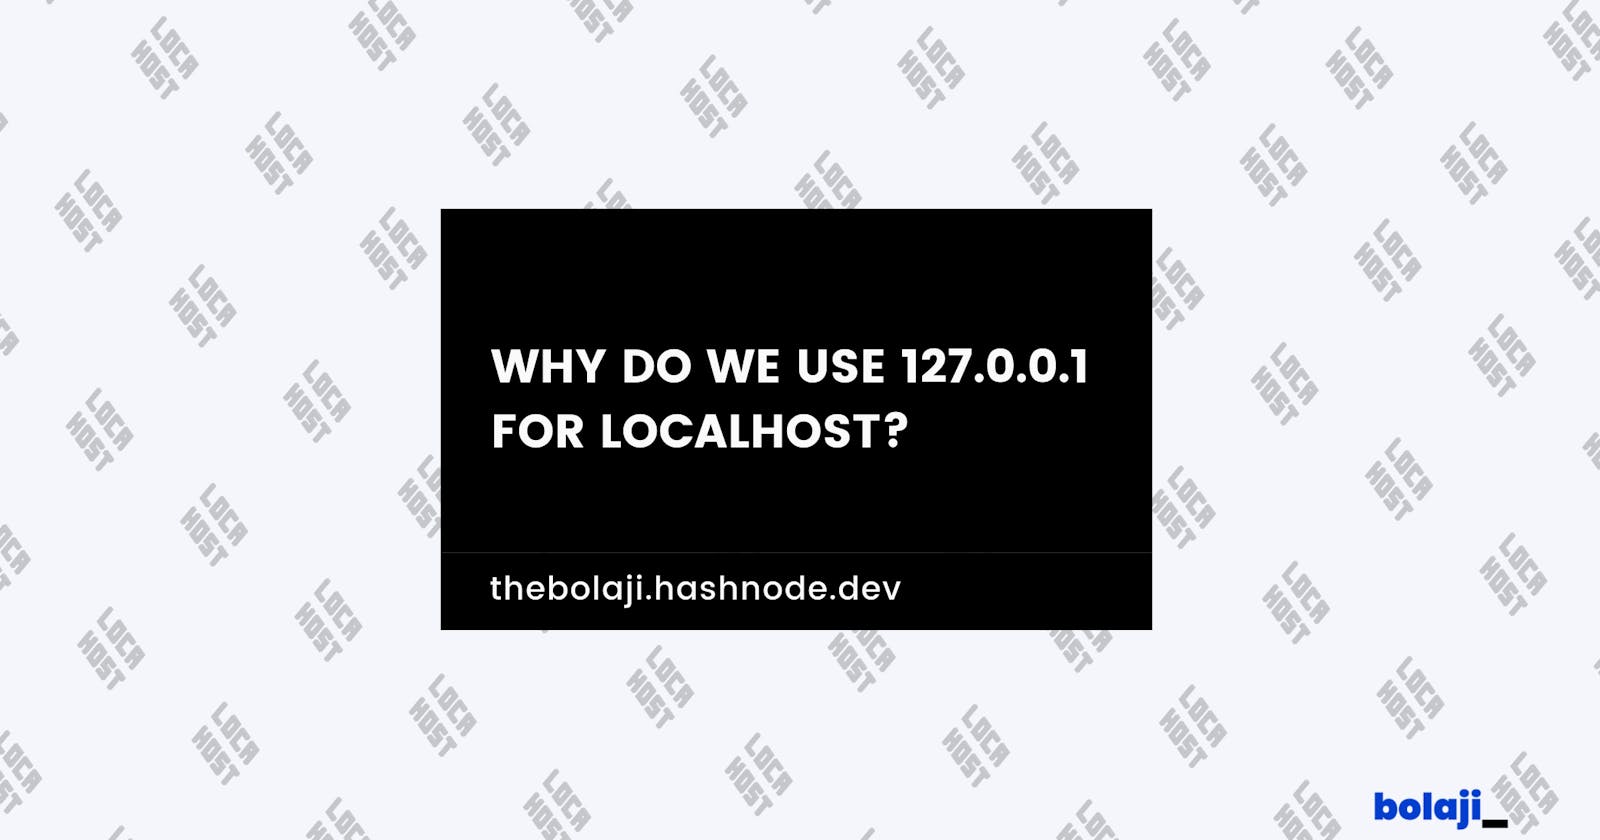 Why Do we use 127.0.0.1 for Localhost?